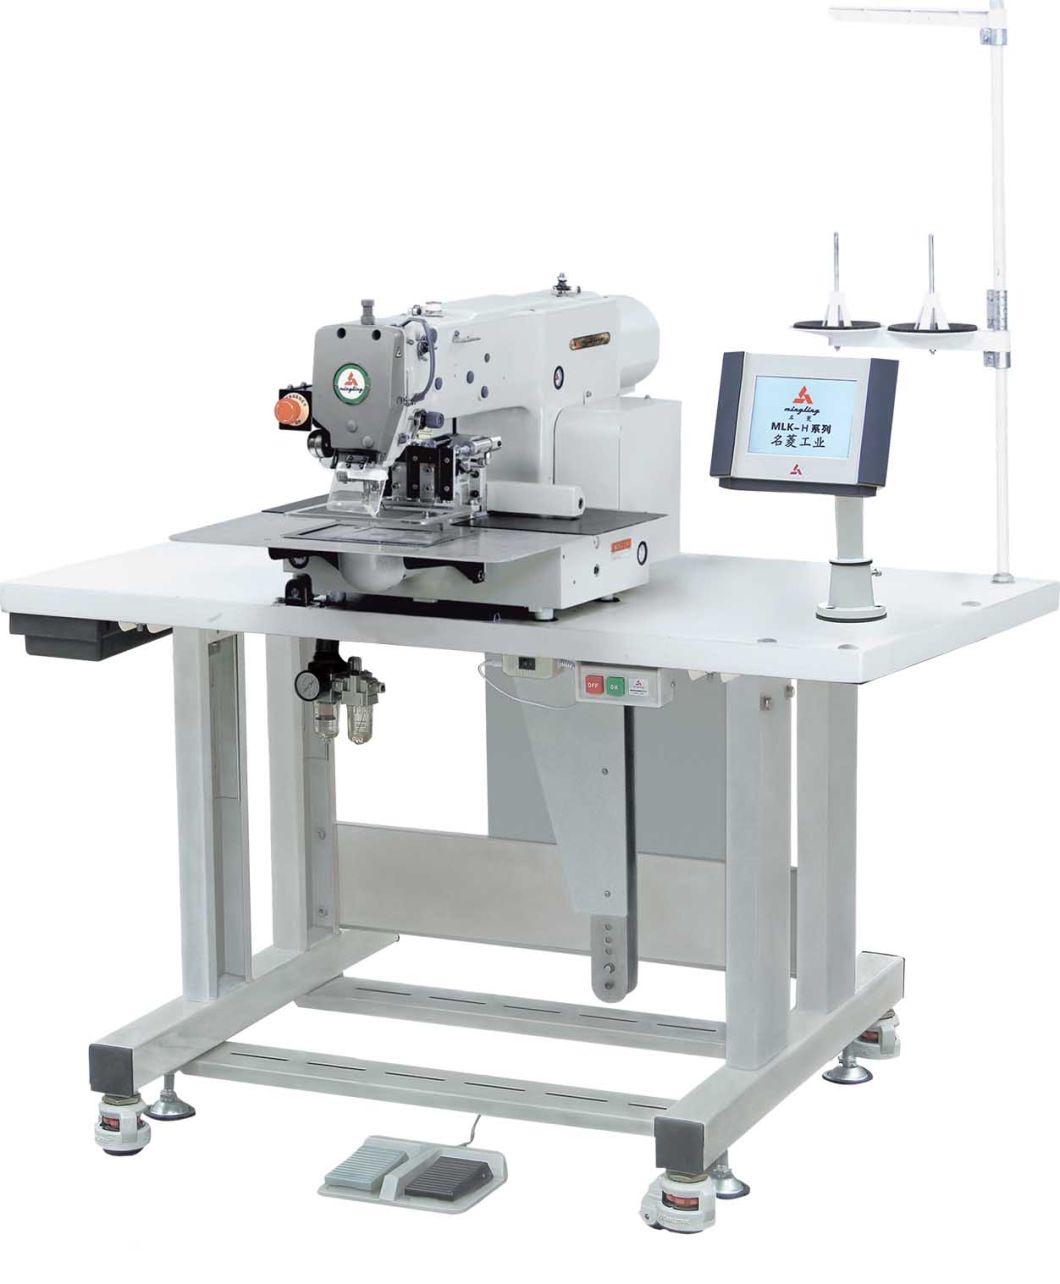 Mingling Barcode Scanning Recognition Function Automatic Sewing Machine H1510